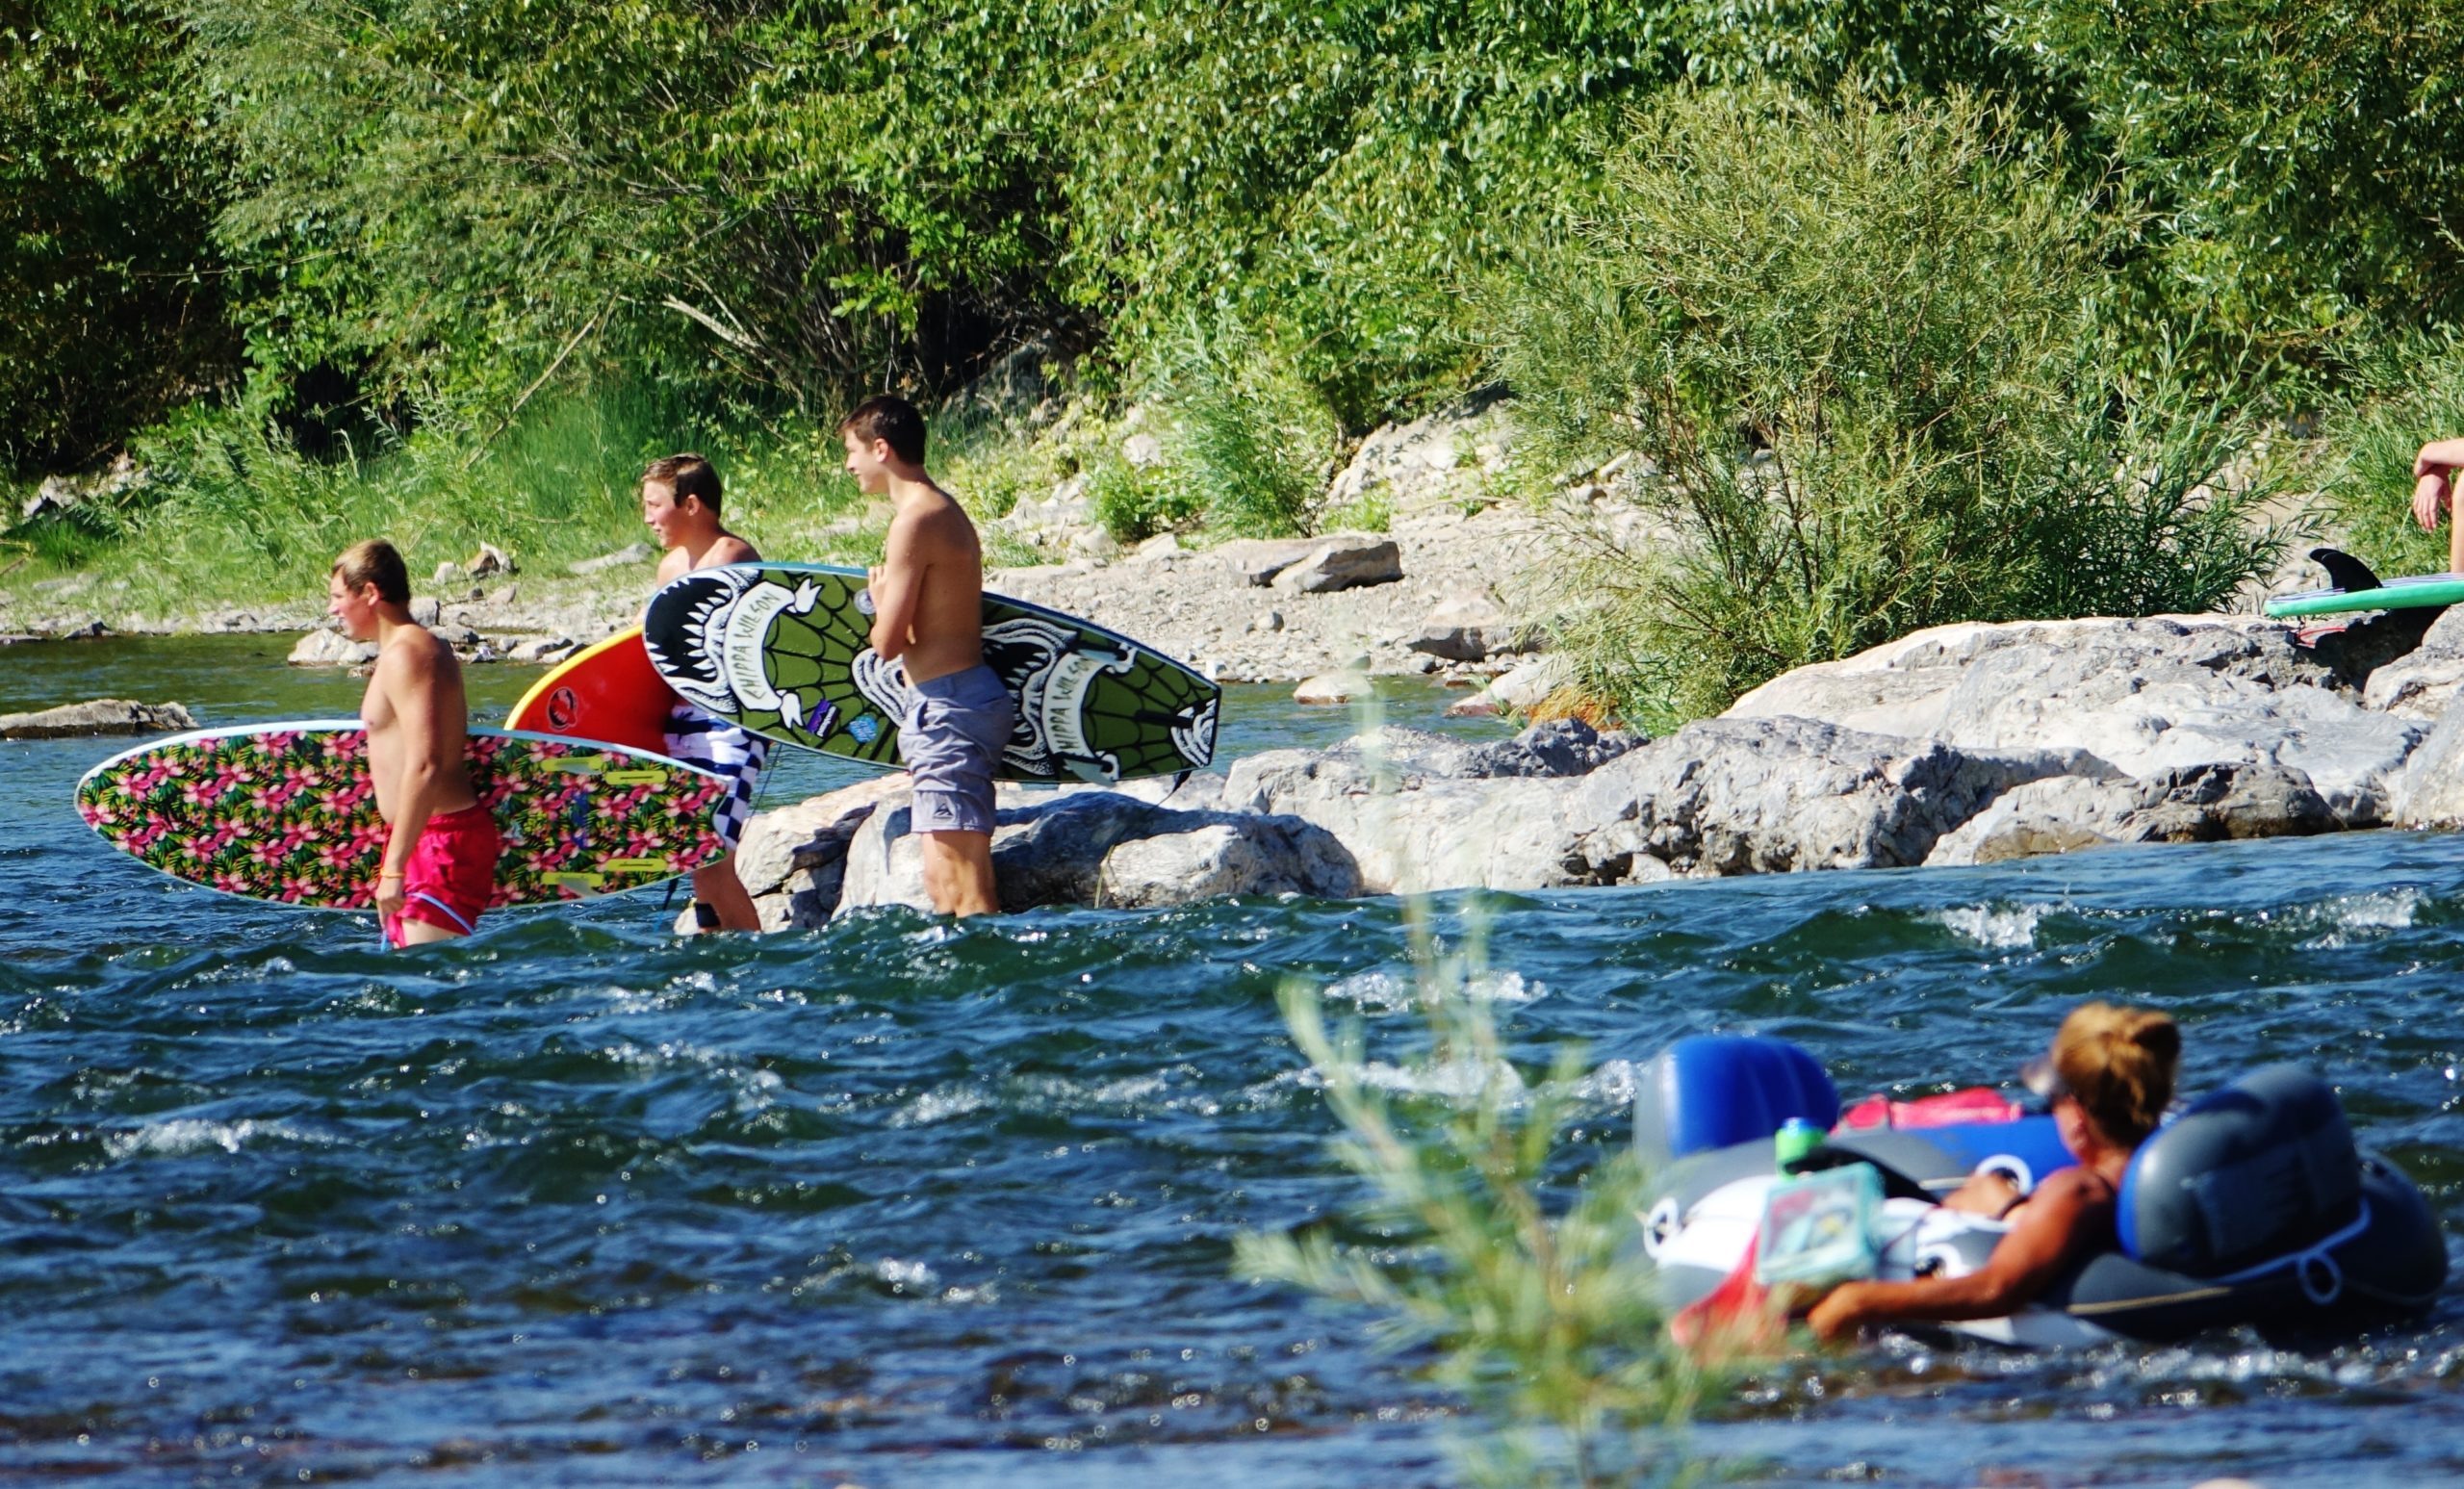 People float and paddle the river in summer